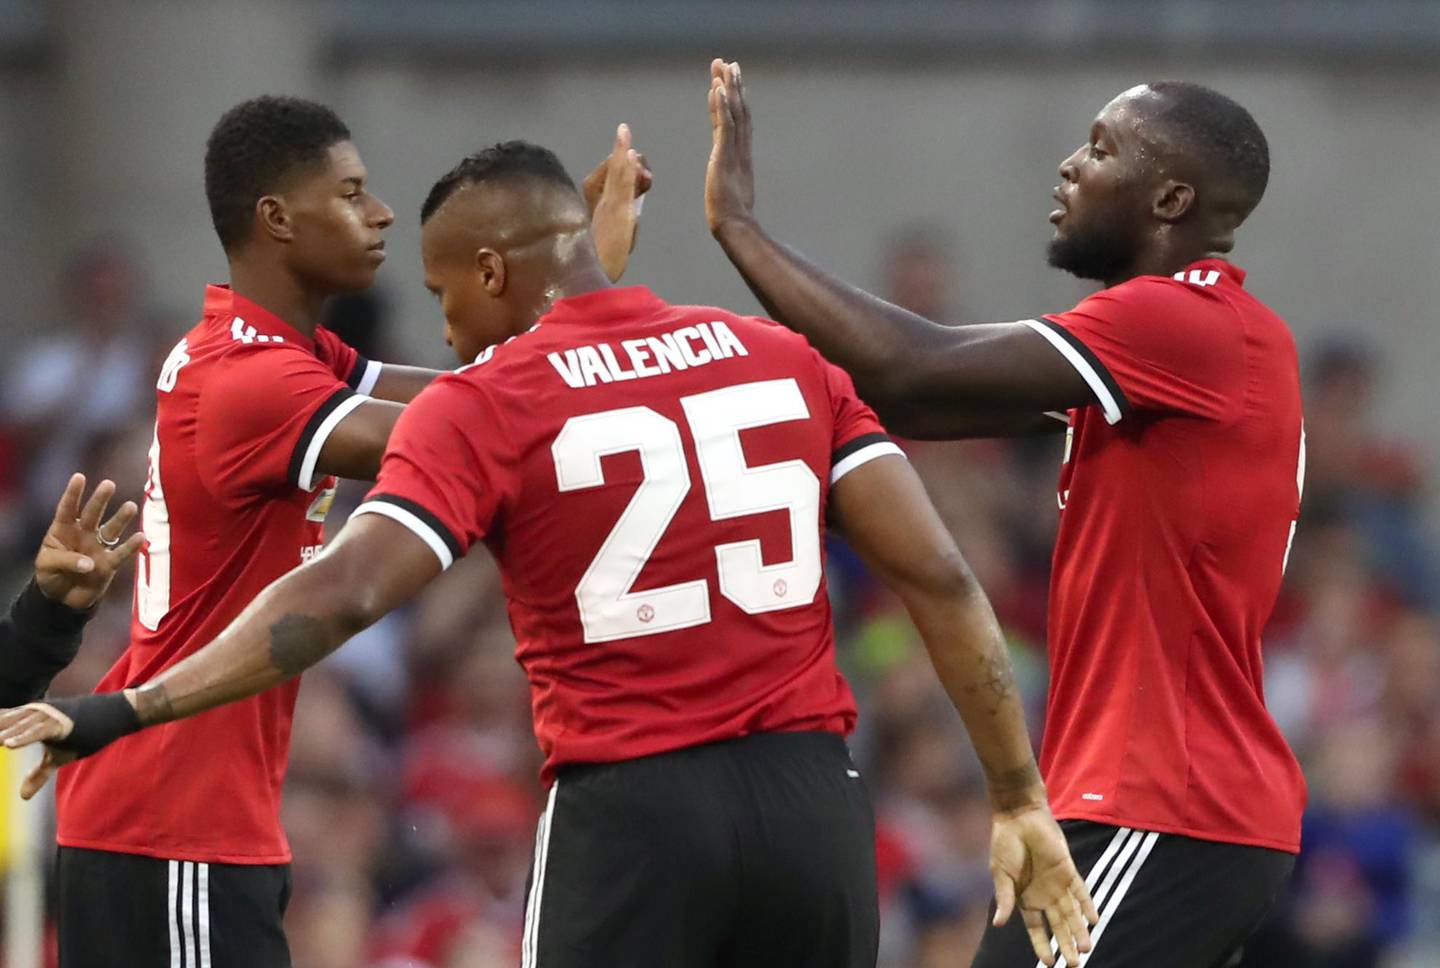 Manchester United's Romelu Lukaku (right) is substituted for Marcus Rashford during the pre-season friendly match at the Aviva Stadium, Dublin. PRESS ASSOCIATION Photo. Picture date: Wednesday August 2, 2017. See PA story SOCCER Man Utd. Photo credit should read: Niall Carson/PA Wire. RESTRICTIONS: Editorial use only. No commercial use.